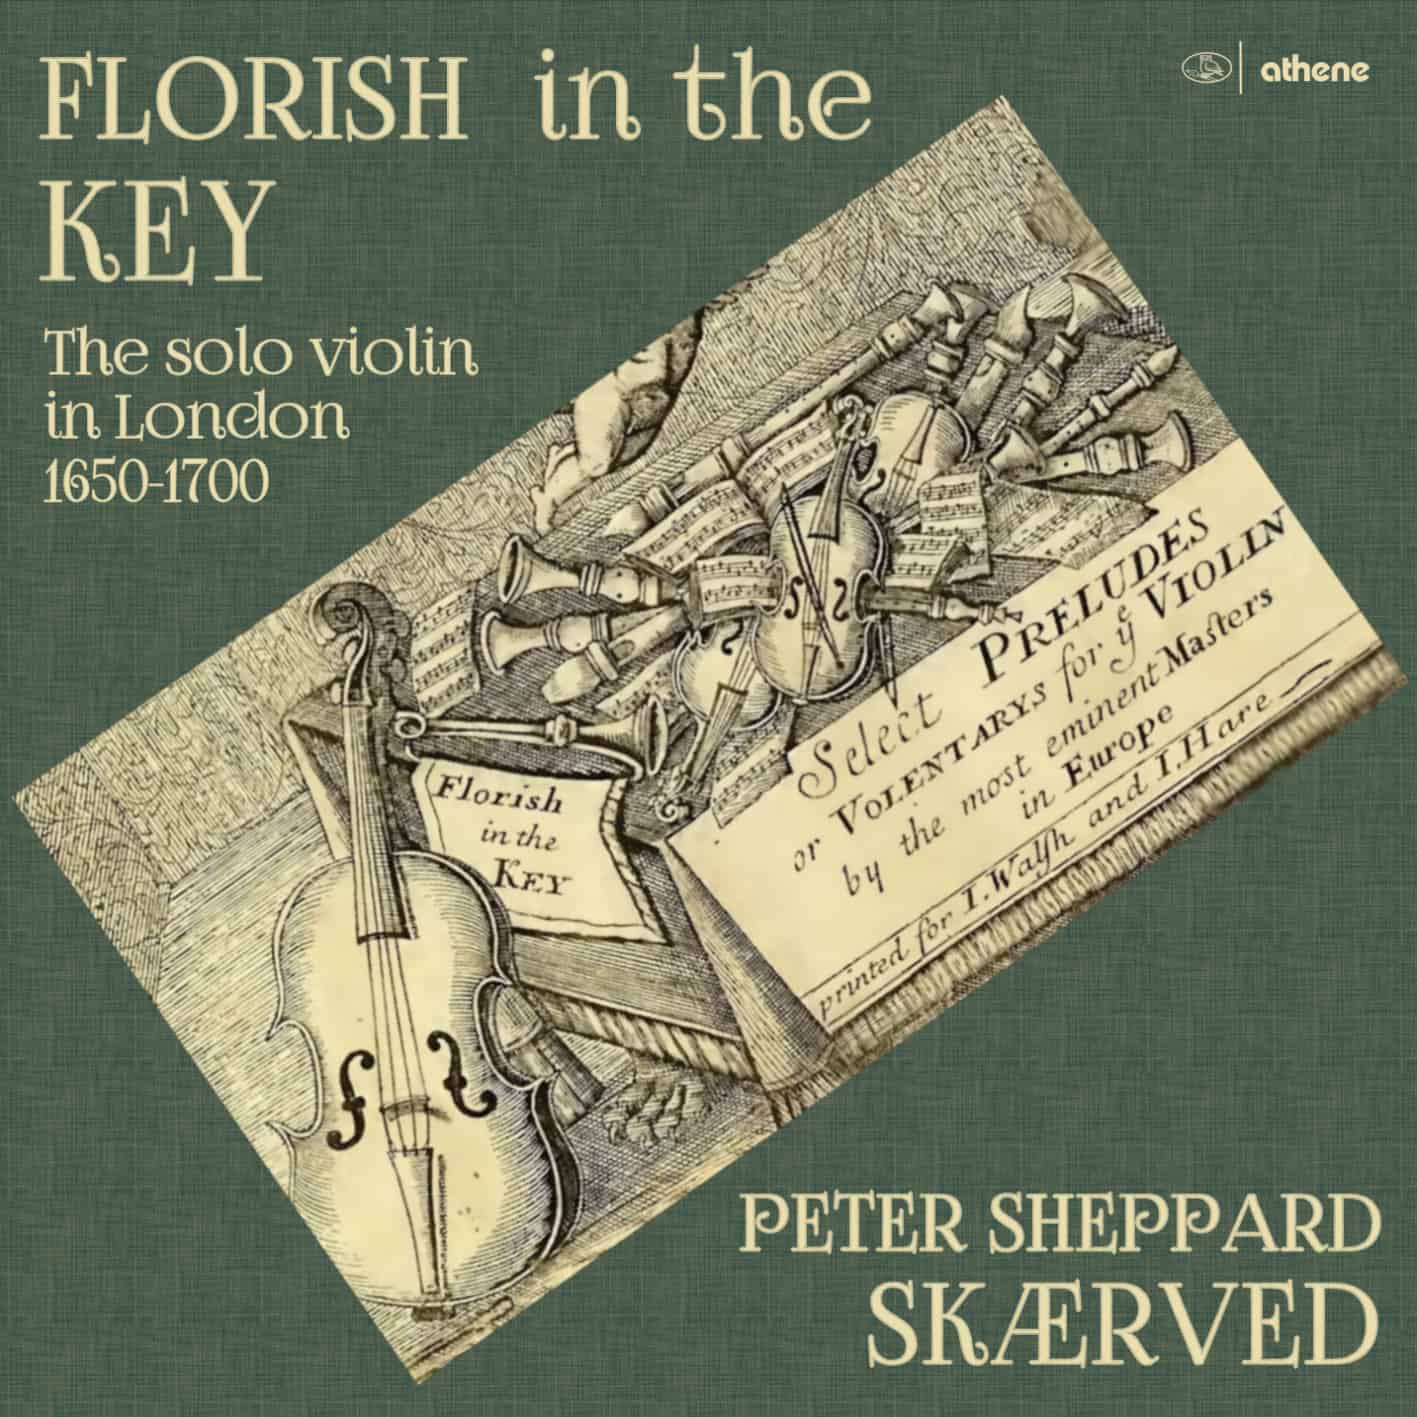 Peter Sheppard Skaerved – Florish in the Key: The Solo Violin in London 1650-1700 (2021) [FLAC 24bit/192kHz]